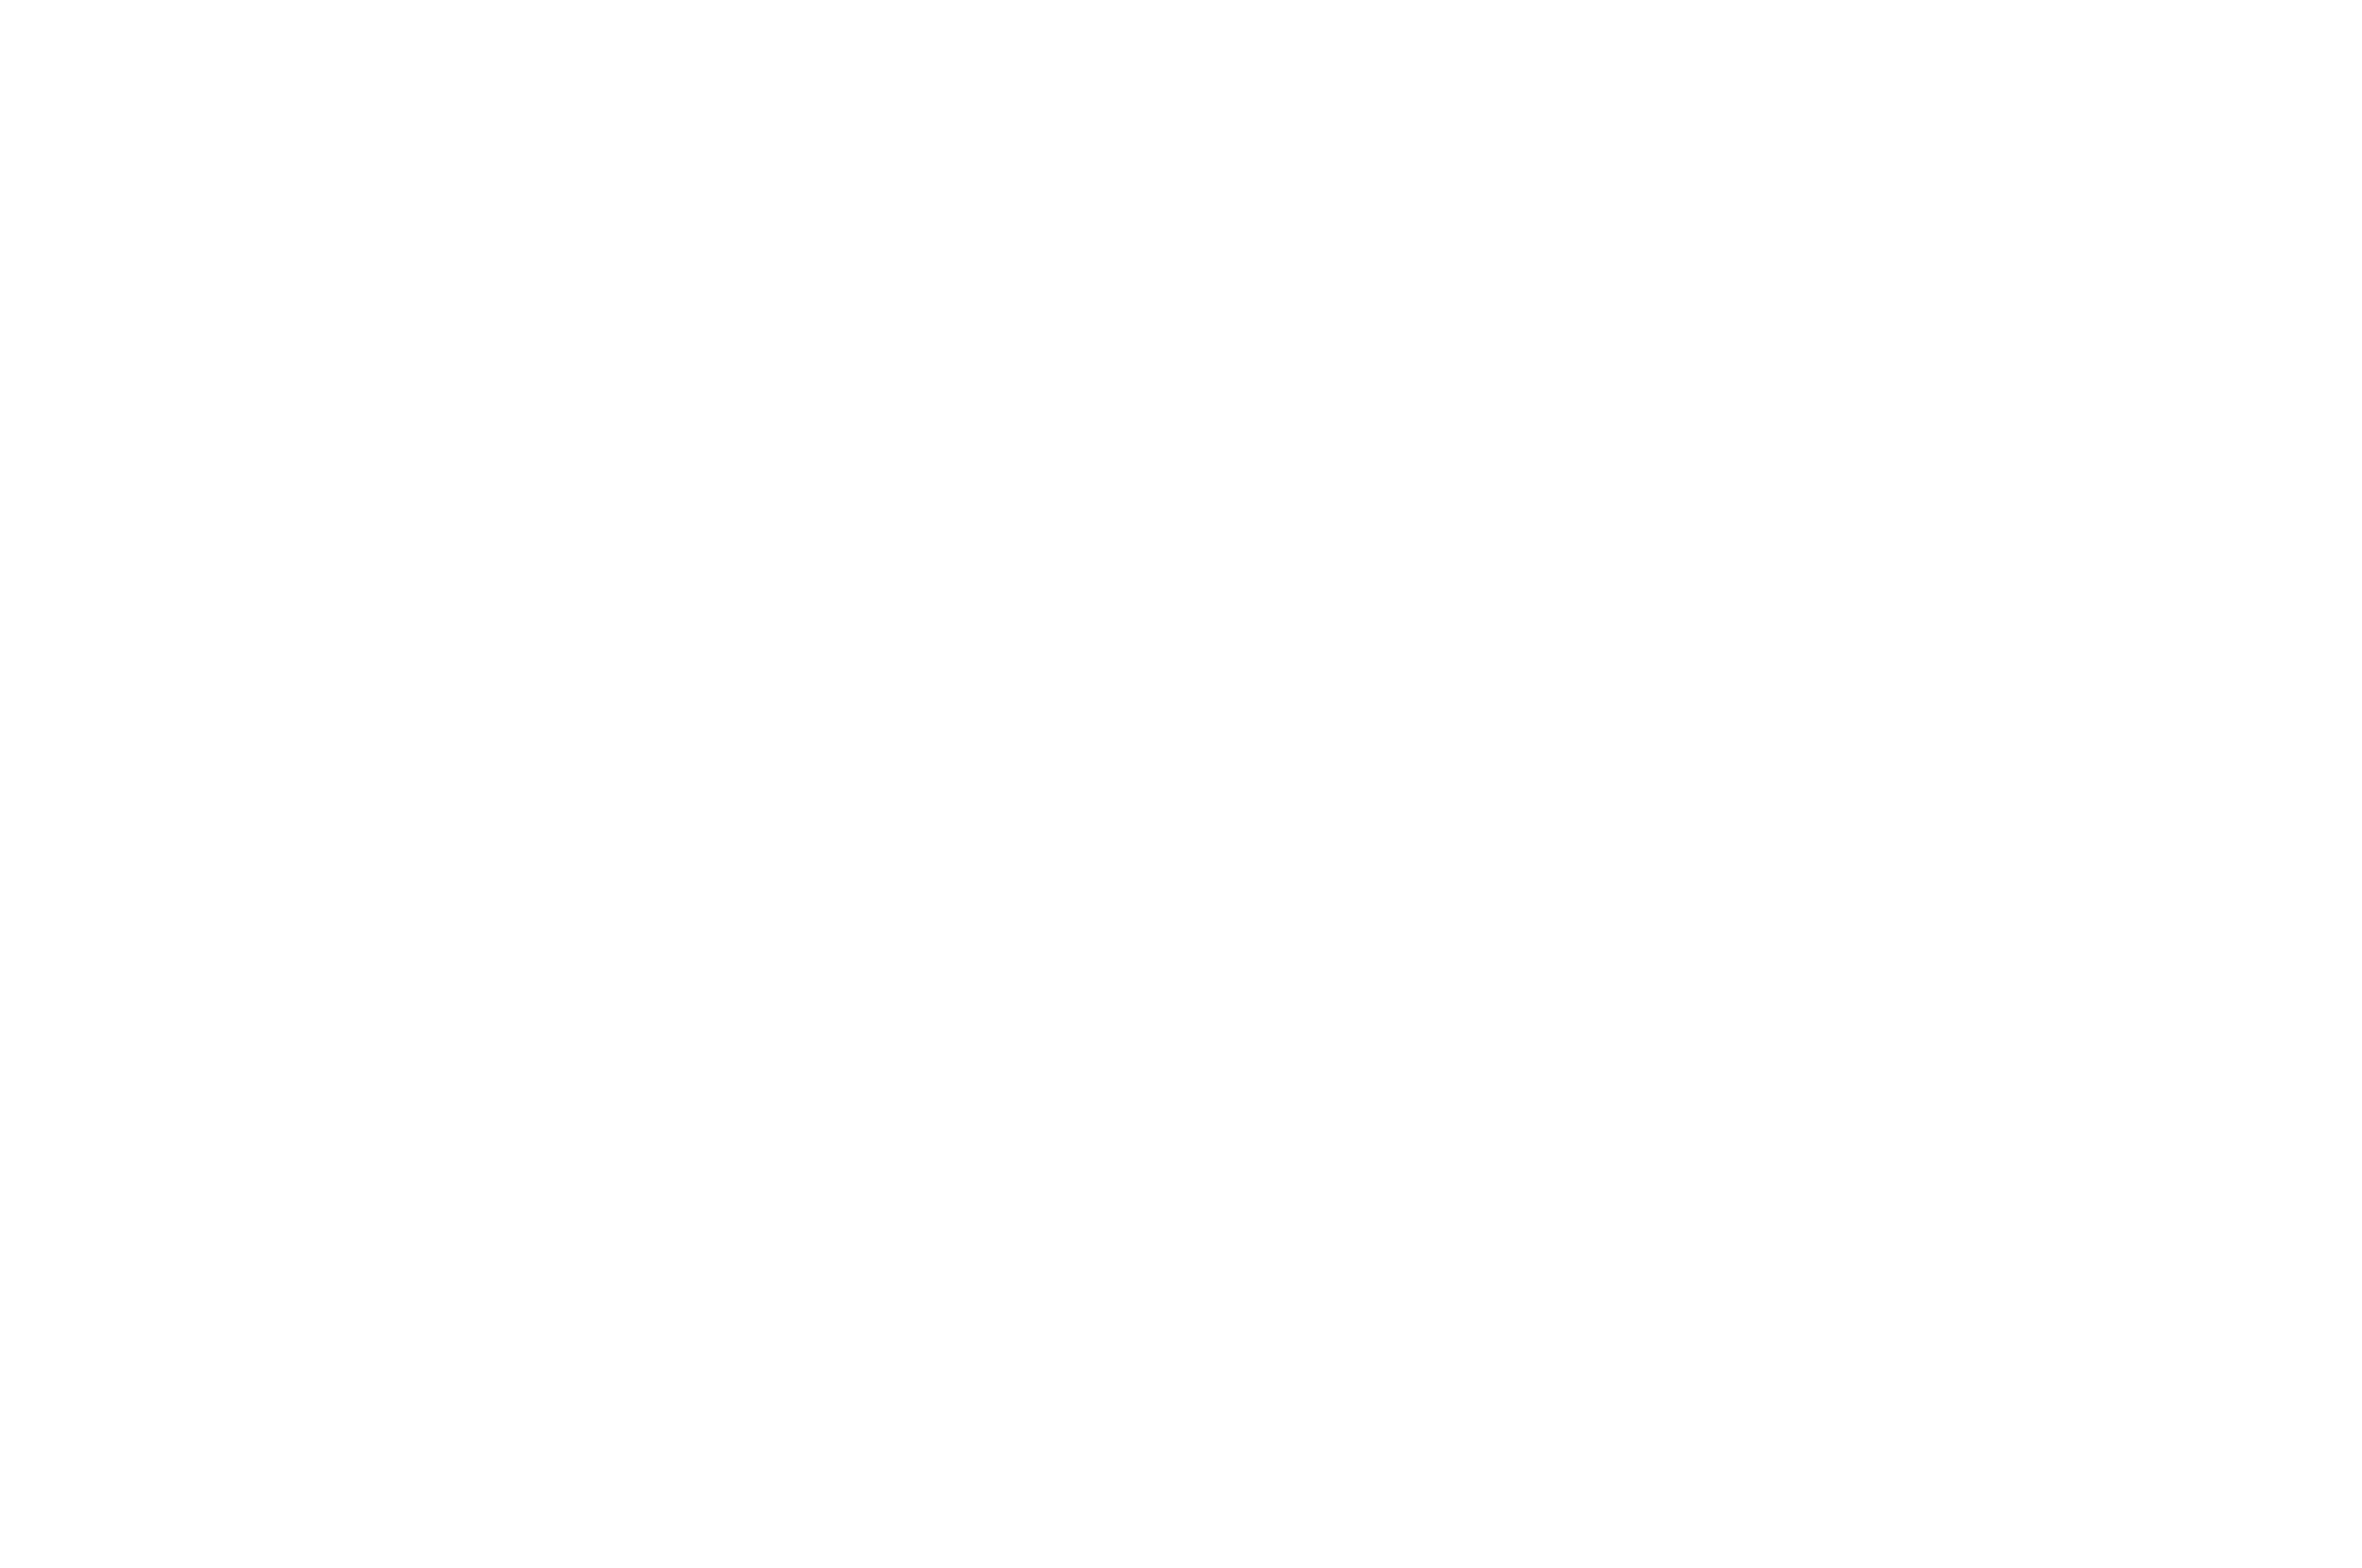 OFFICIALSELECTION-CrypticonSeattleHorrorFilmFestival-2020.png